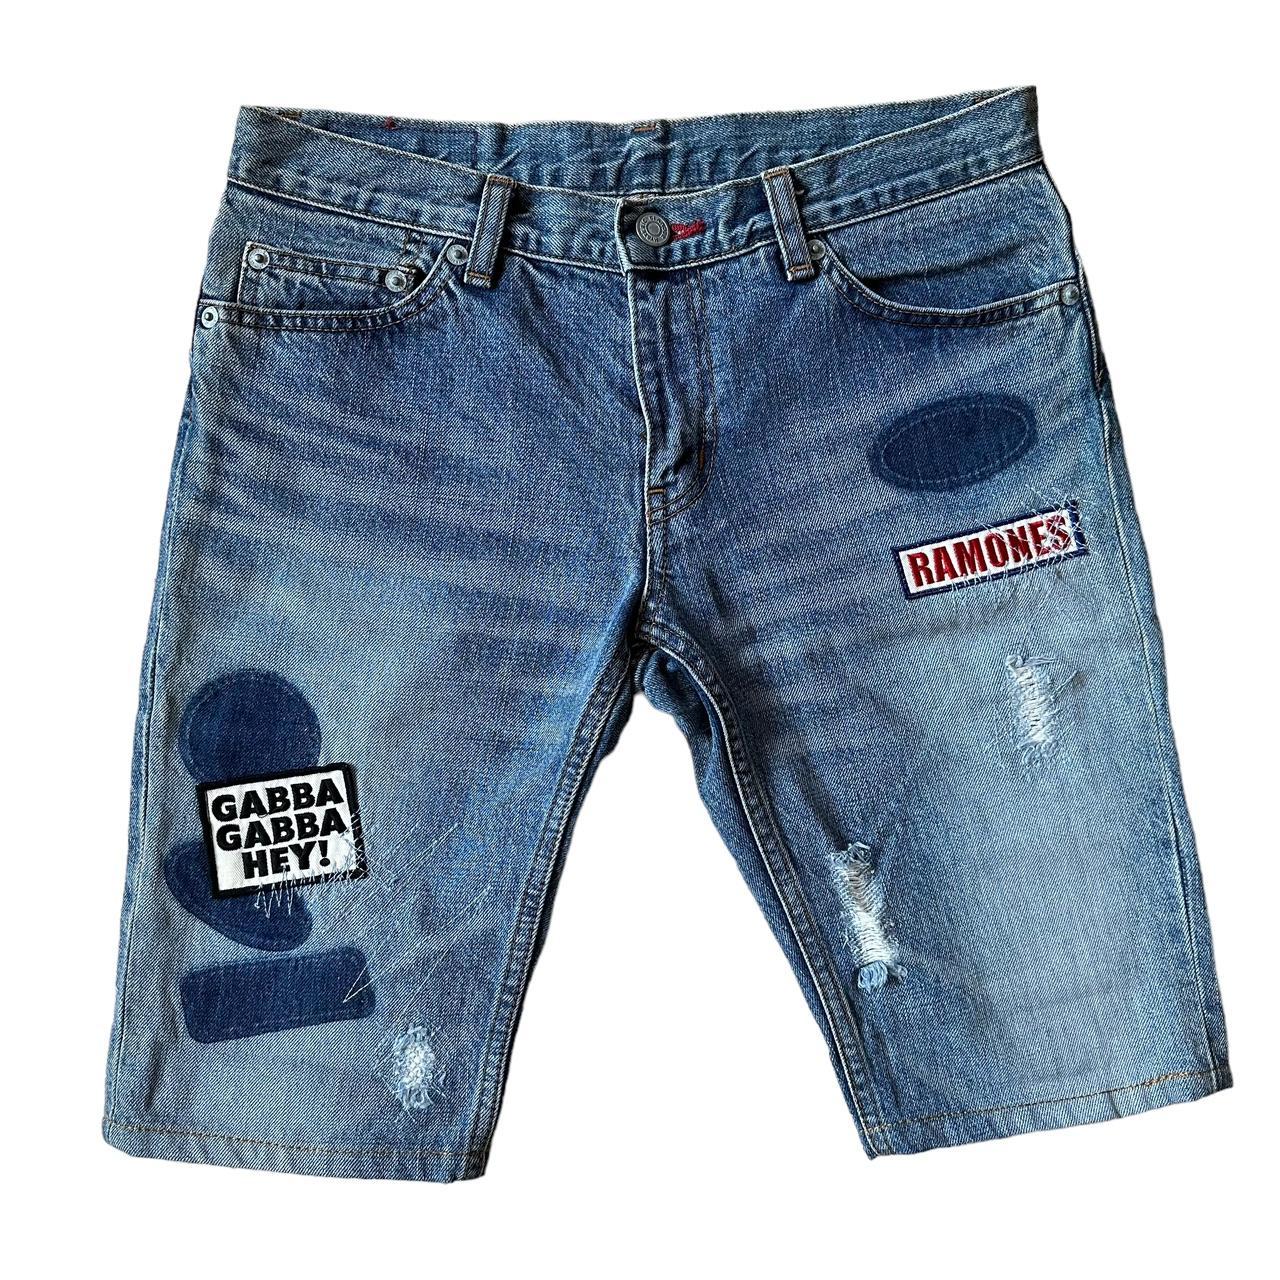 Hysteric Glamour x Ramones Shorts, Size 29